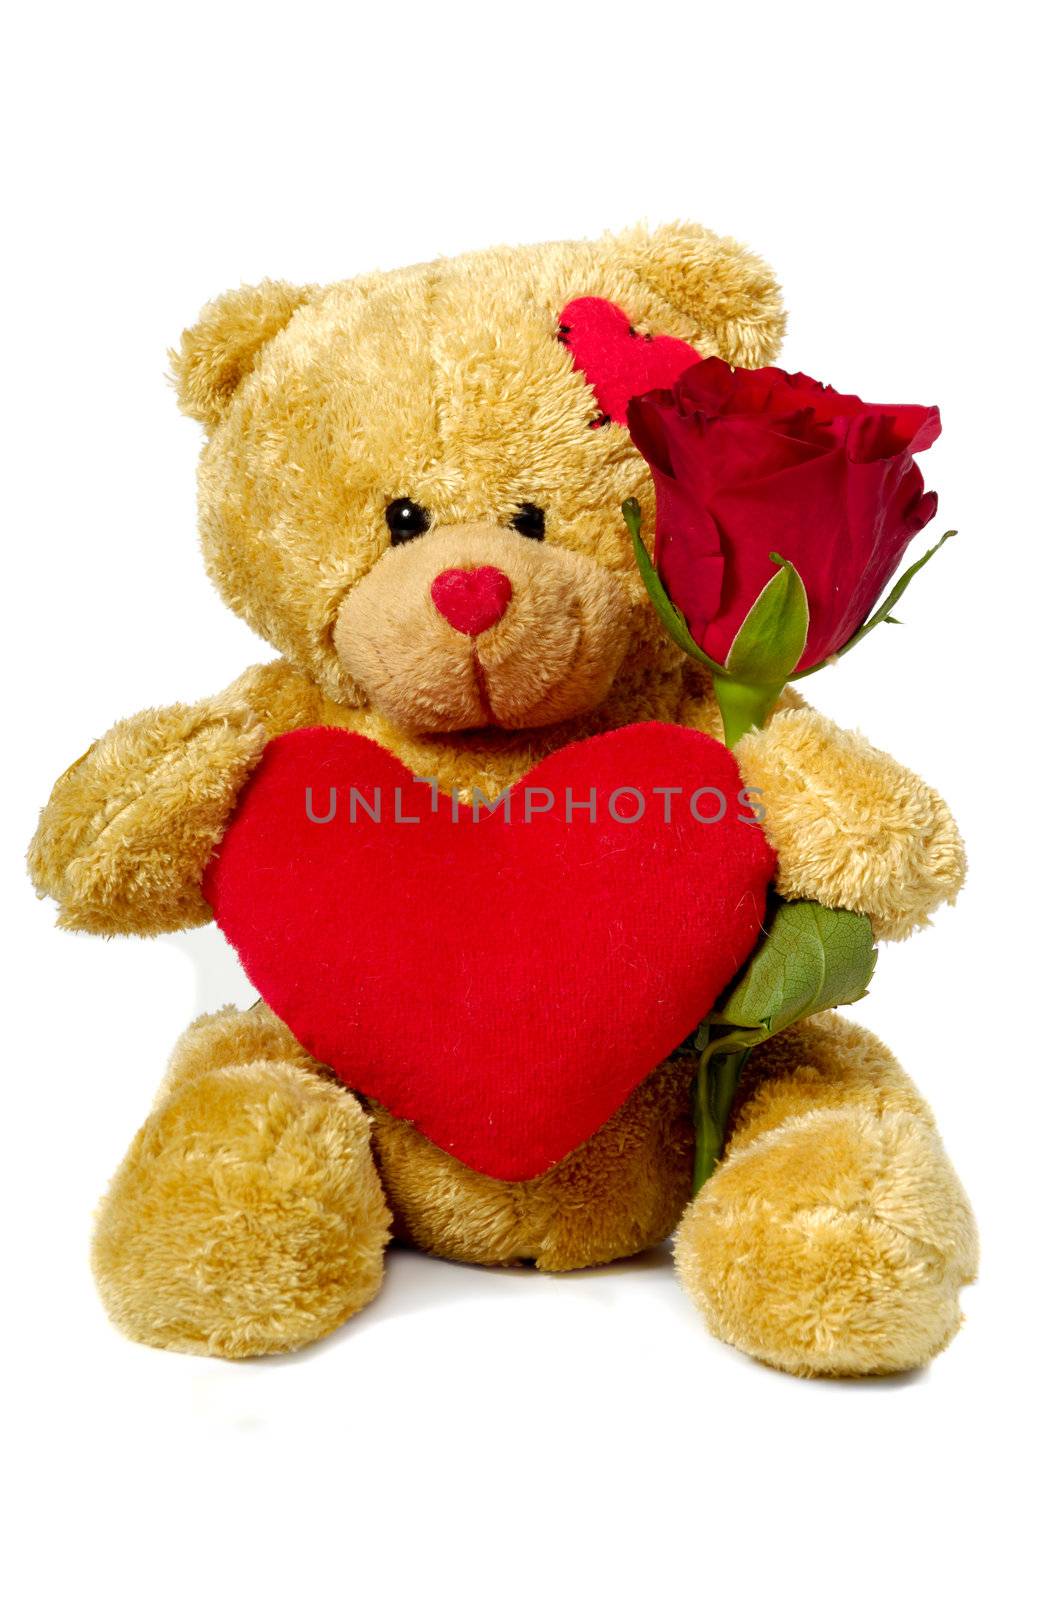 A sweet teddy bear is sitting on a white background holding a red rose flower and a red heart.